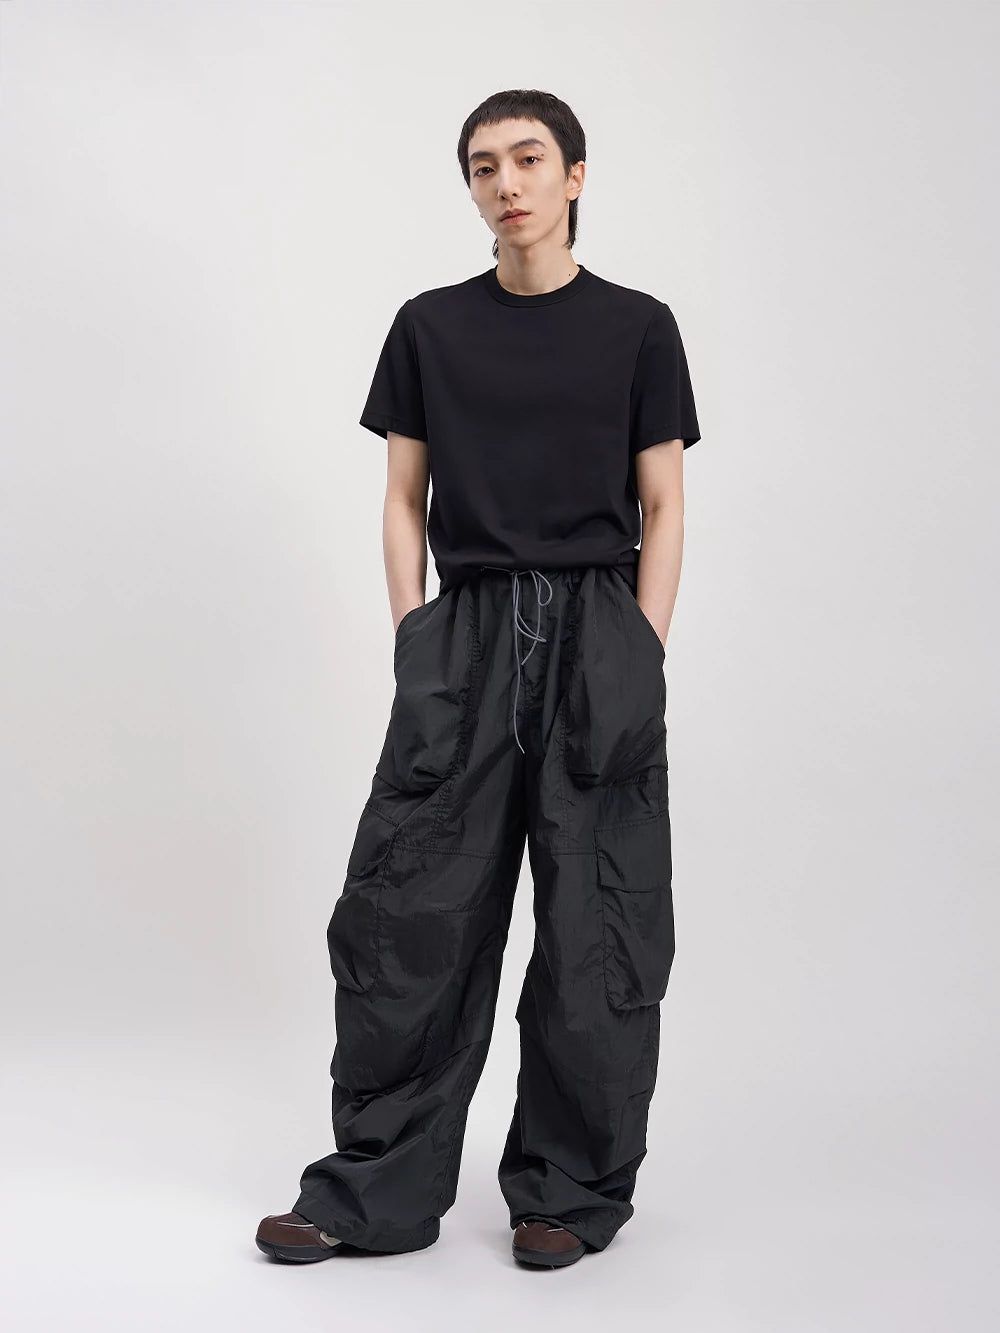 Casual Cargo Style Track Pants Korean Street Fashion Pants By Opicloth Shop Online at OH Vault